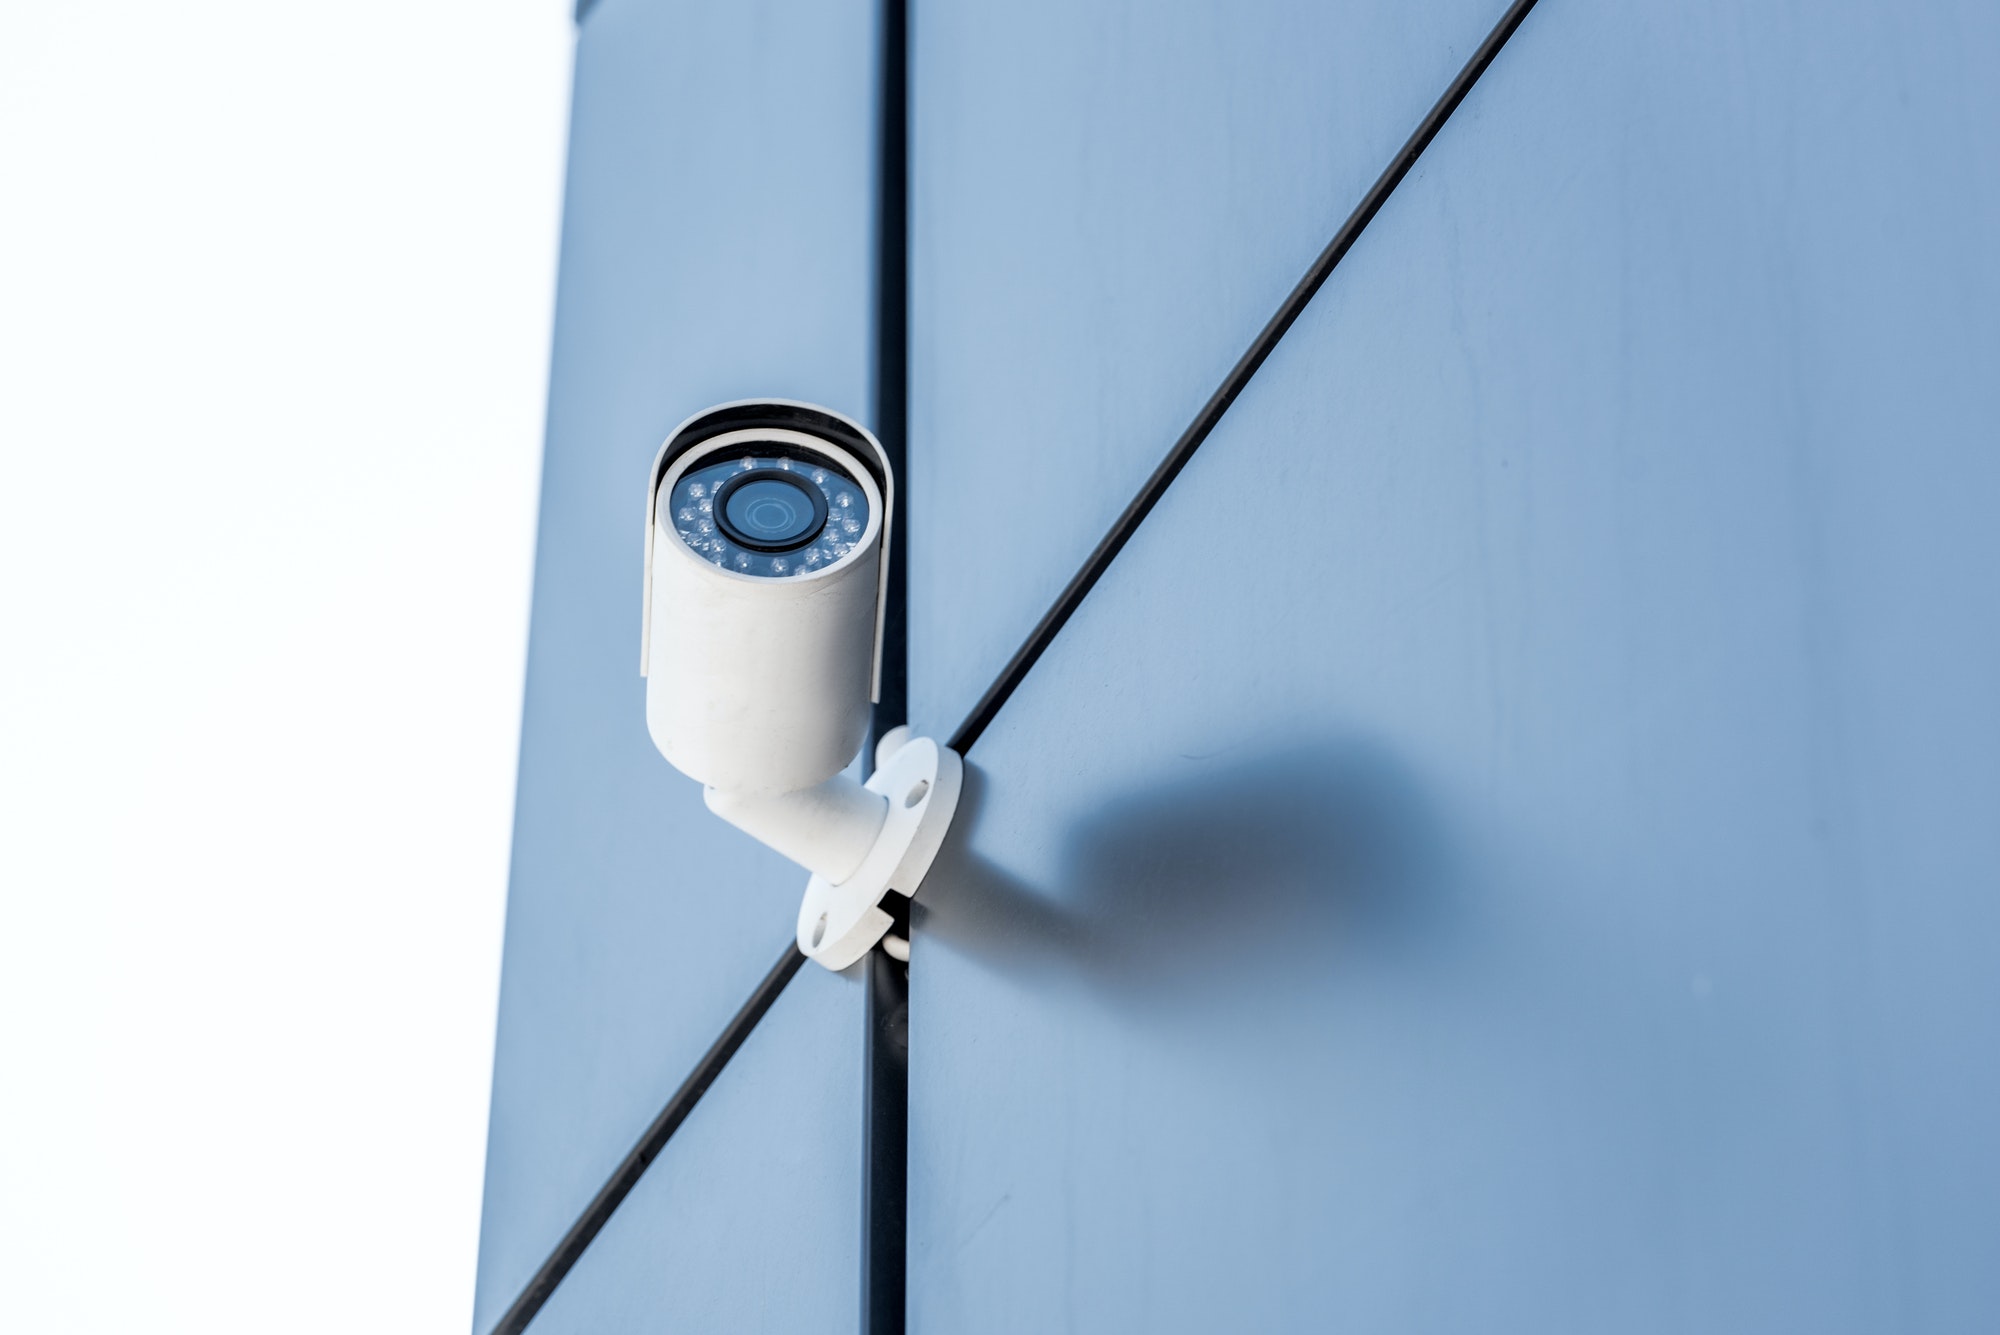 one security camera on blue wall of office building, security system concept